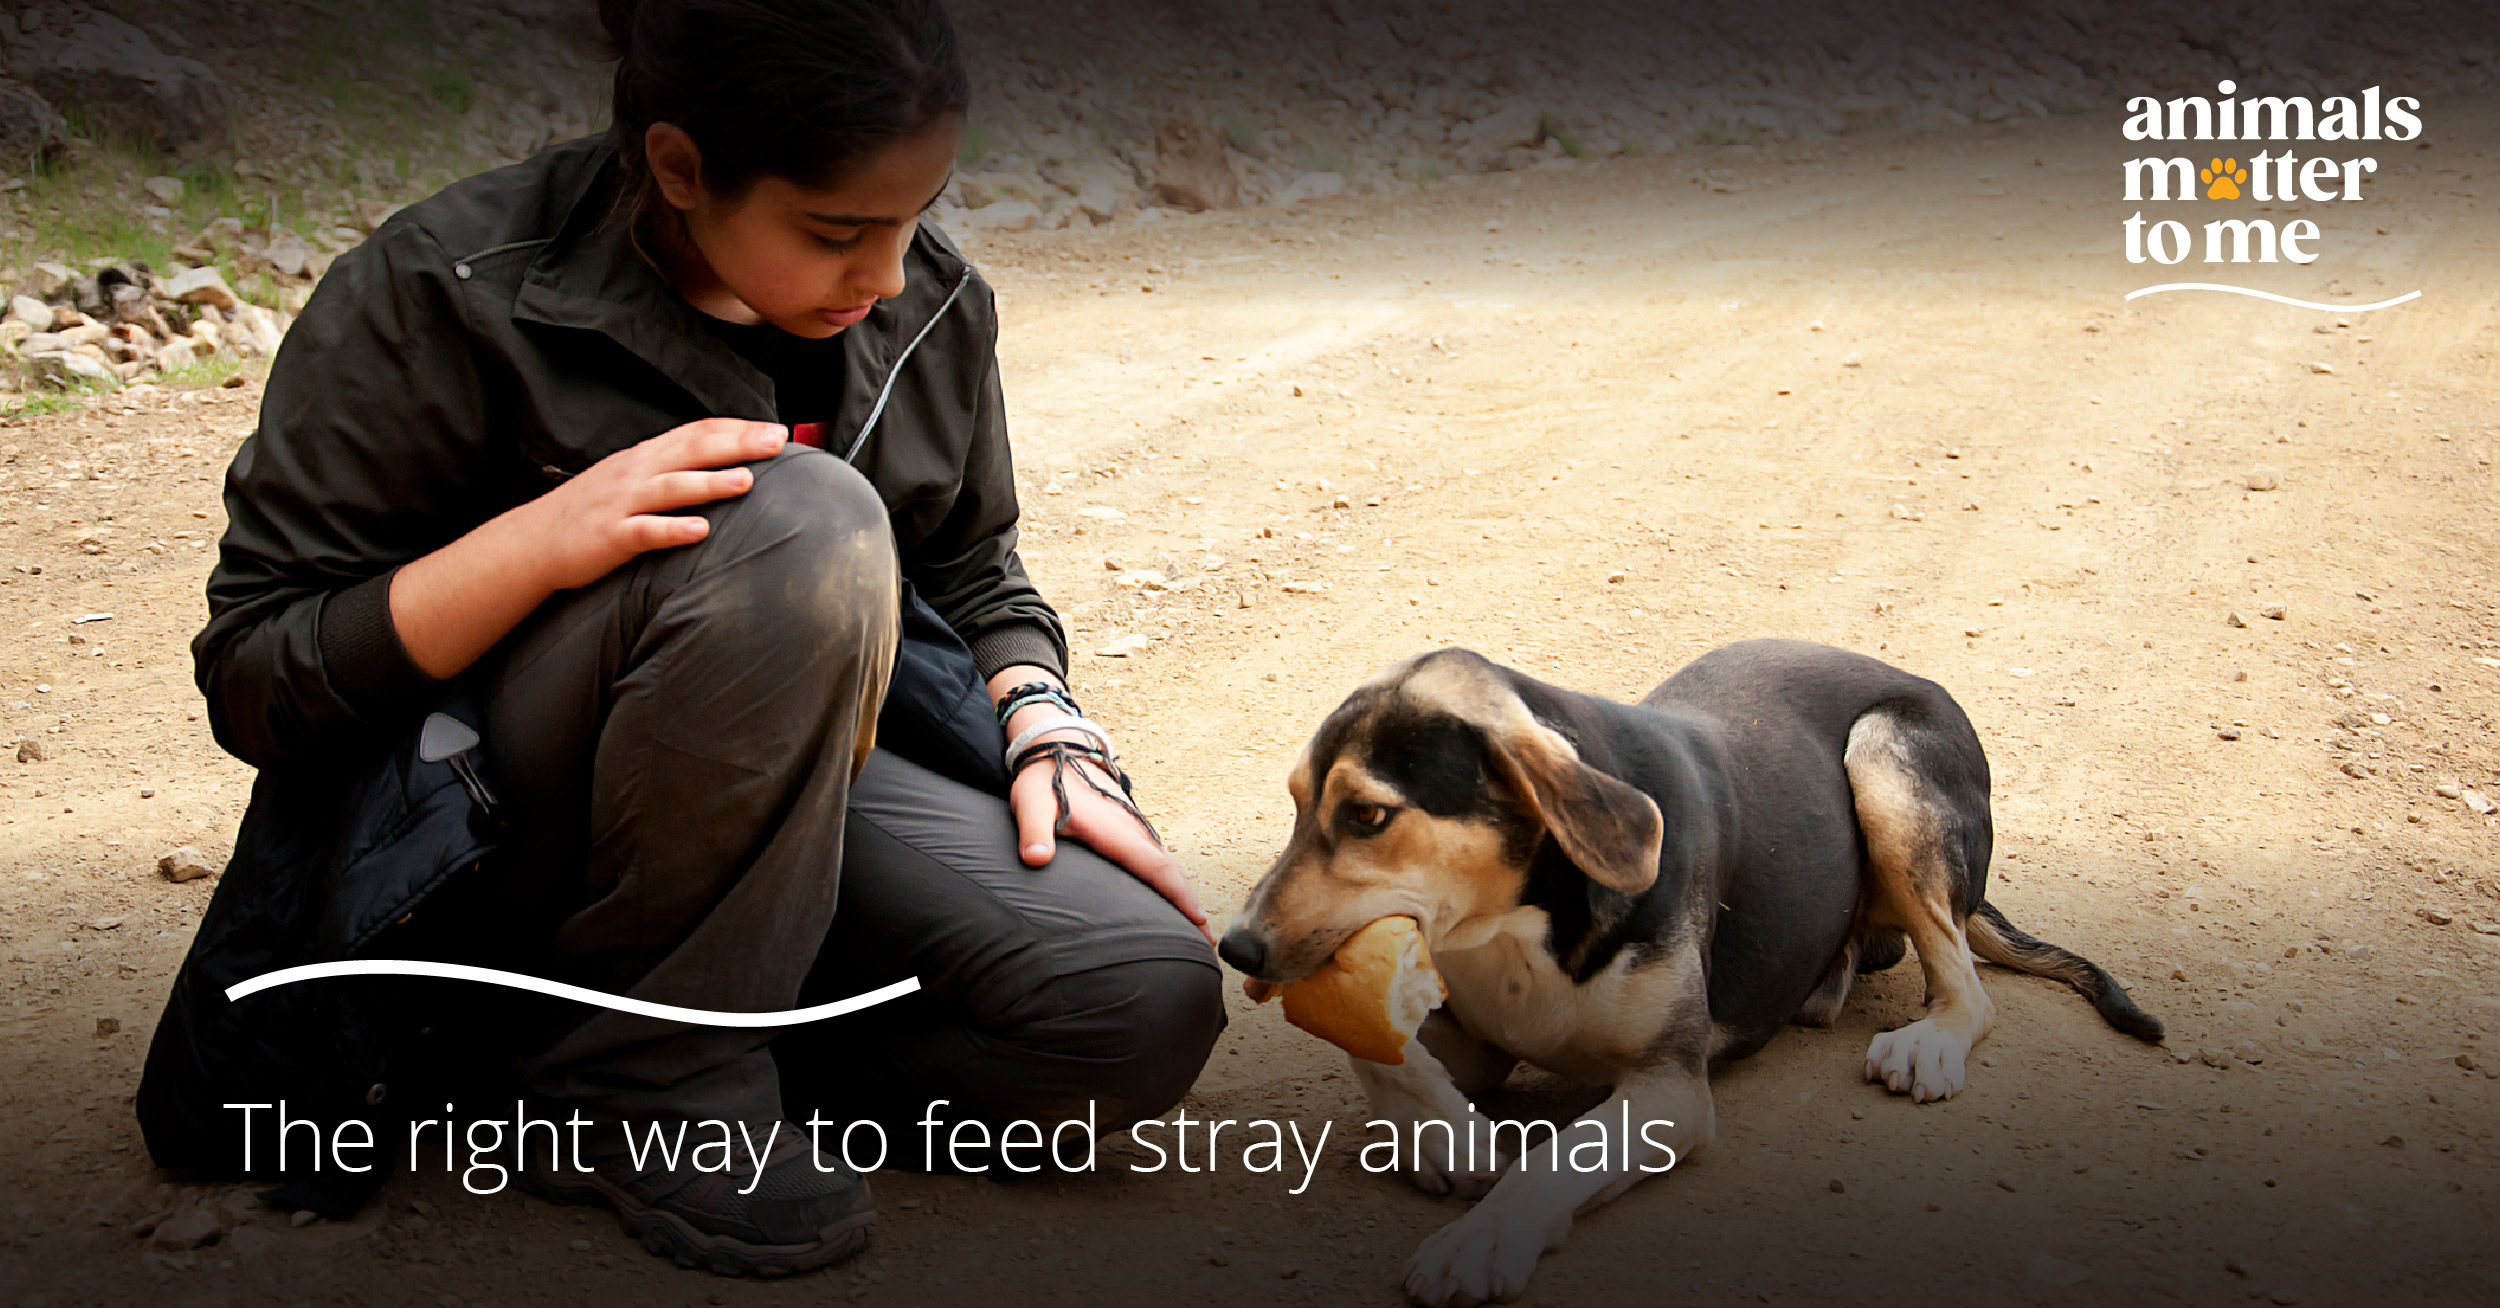 The right way to feed stray animals - Animals Matter To Me